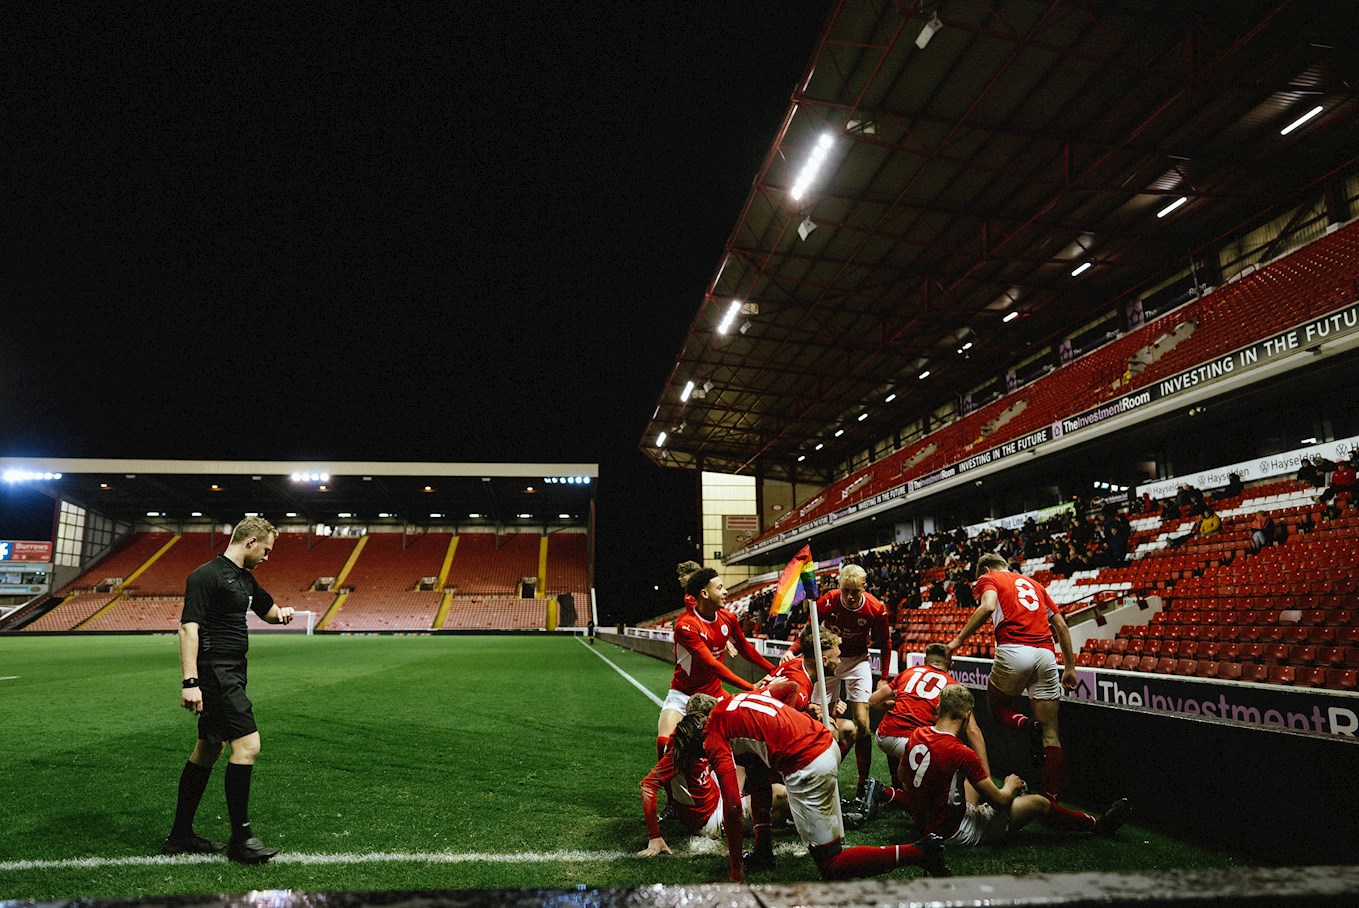 Our U18s celebrate scoring against Crystal Palace in the FA Youth Cup third round at Oakwell